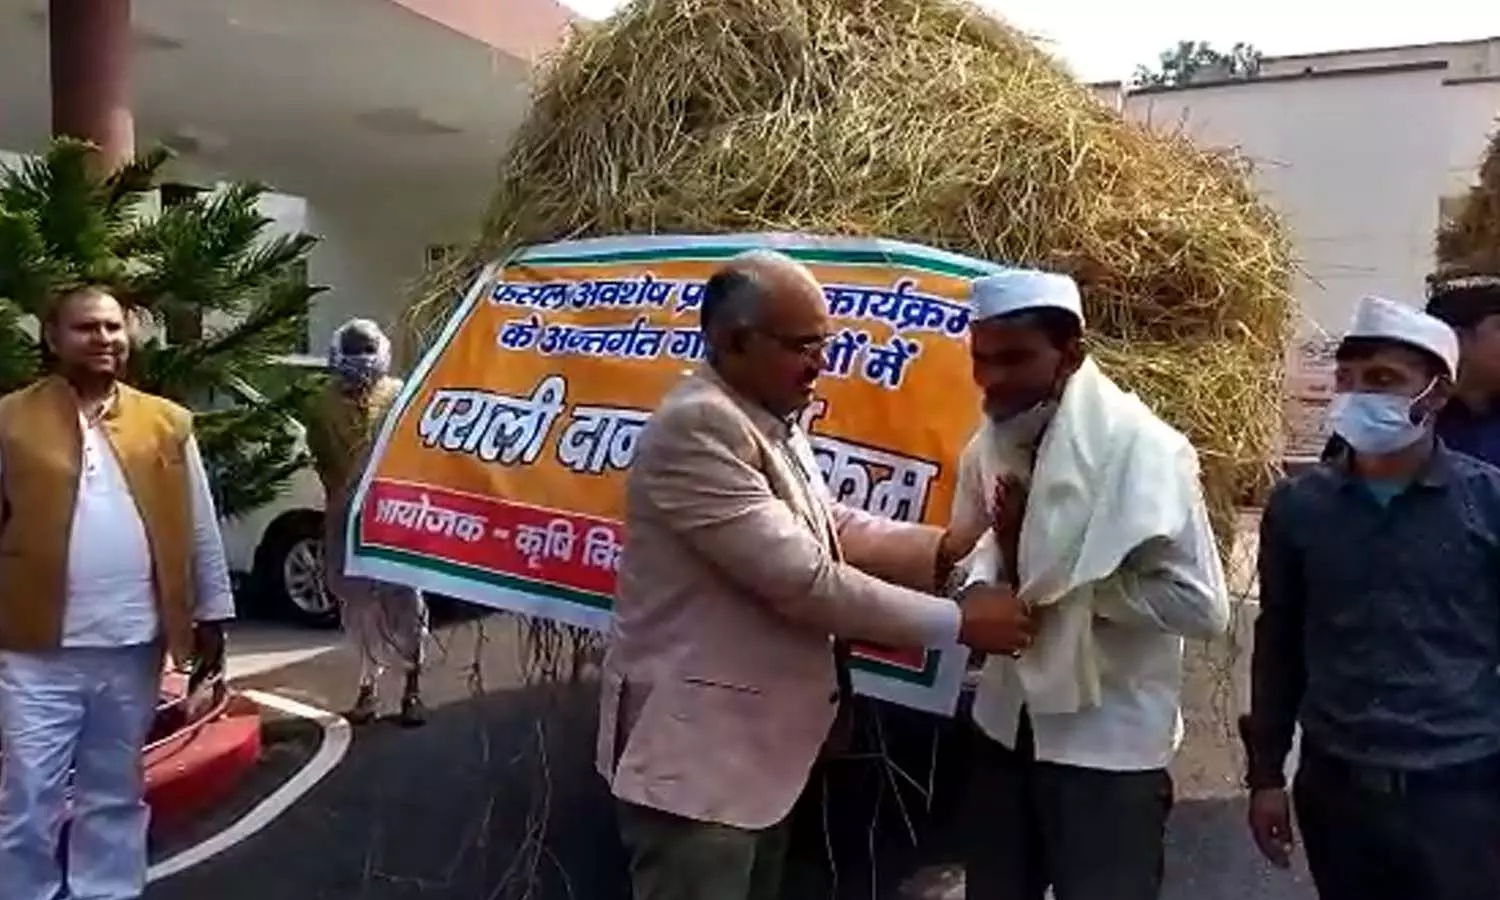 Kanpur Dehat News:Farmers honored in Kanpur countryside: Donated to cowsheds instead of burning, donated crop residues